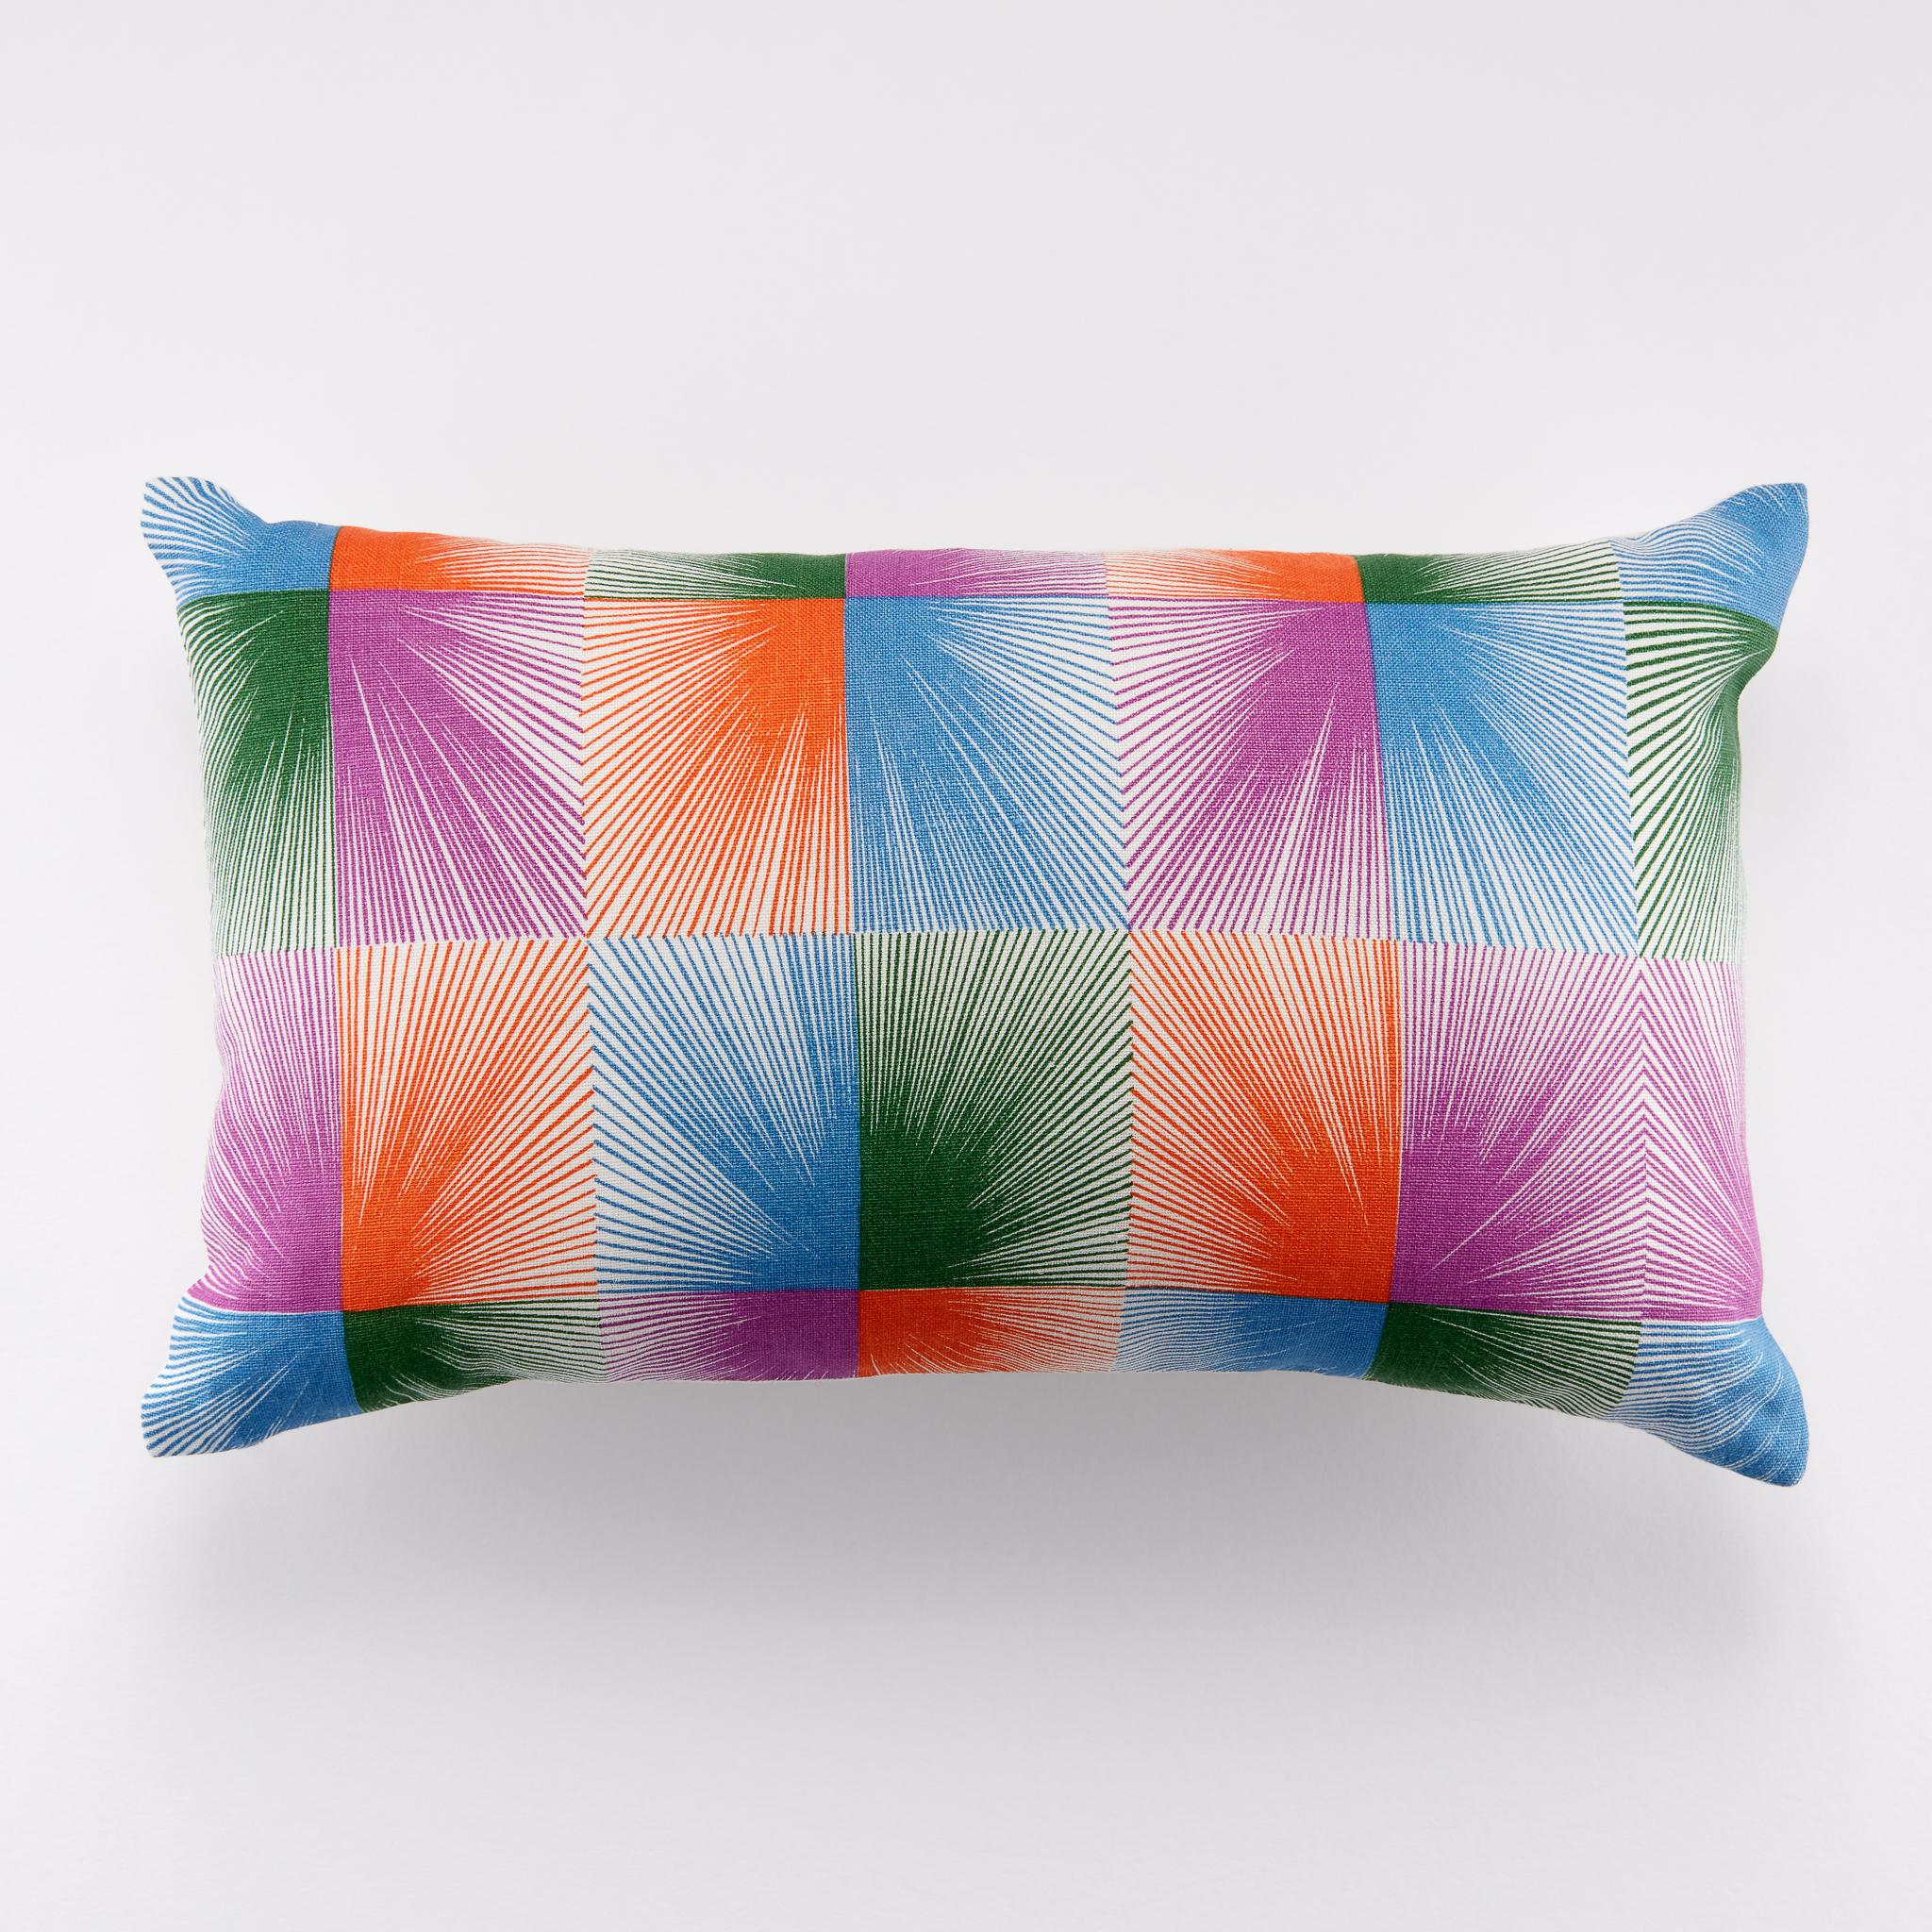 Hand-Crafted Reflection, Cushion Cover by Lothar Götz For Sale